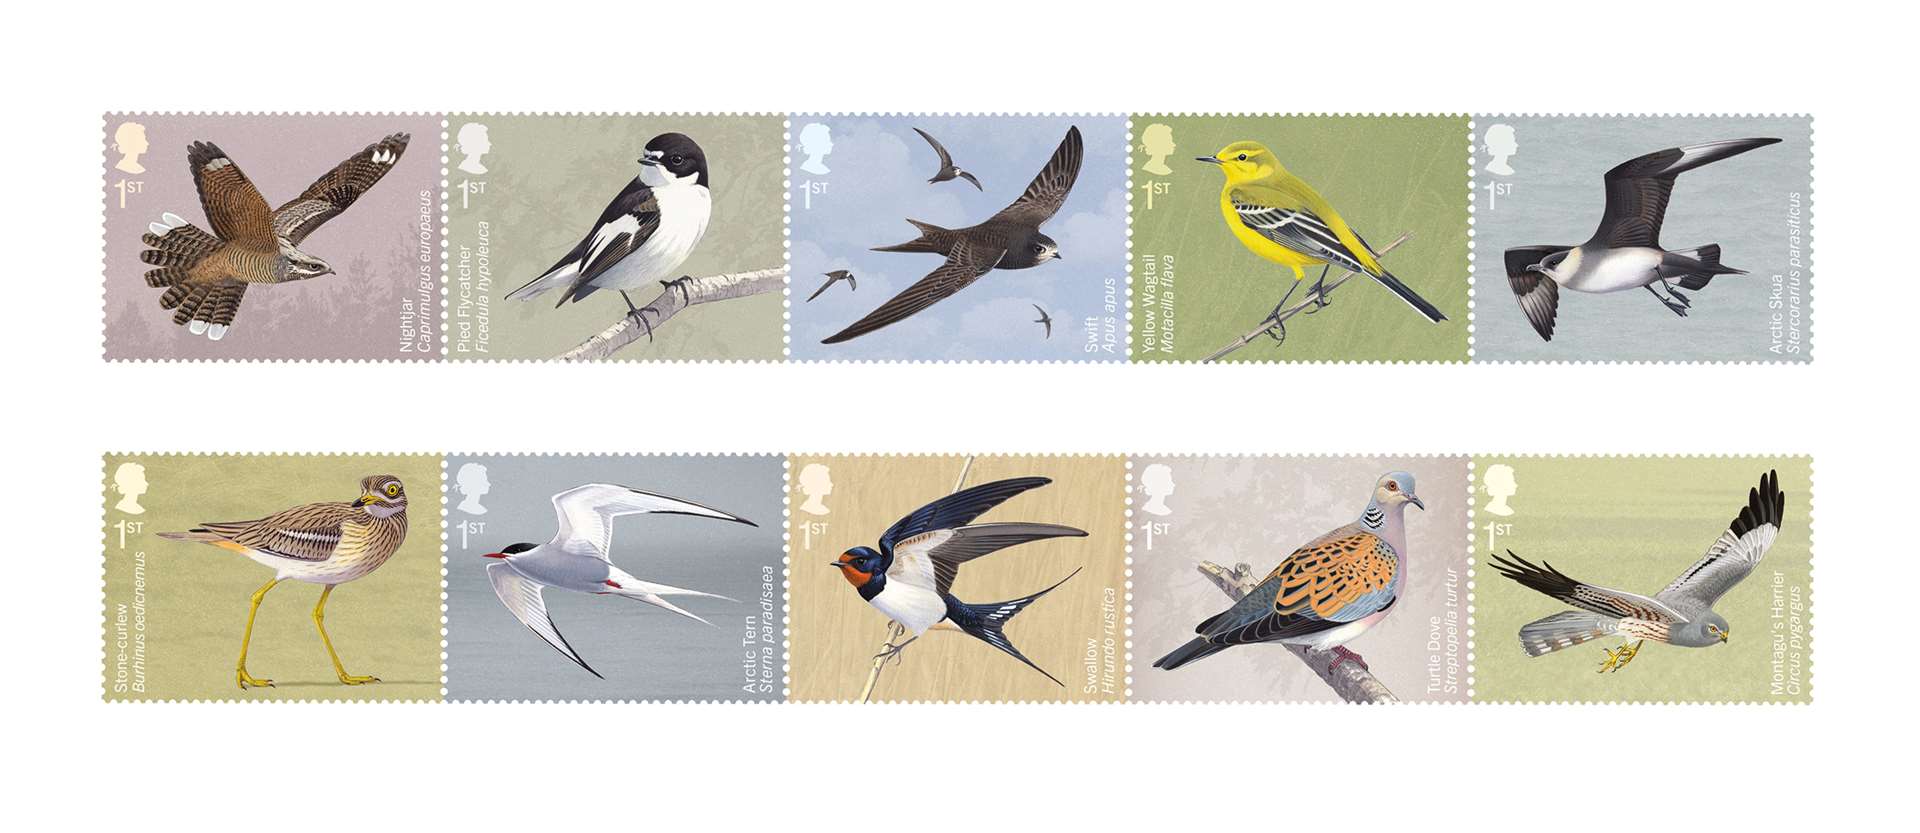 The latest stamps feature migratory birds and have been released by Royal Mail